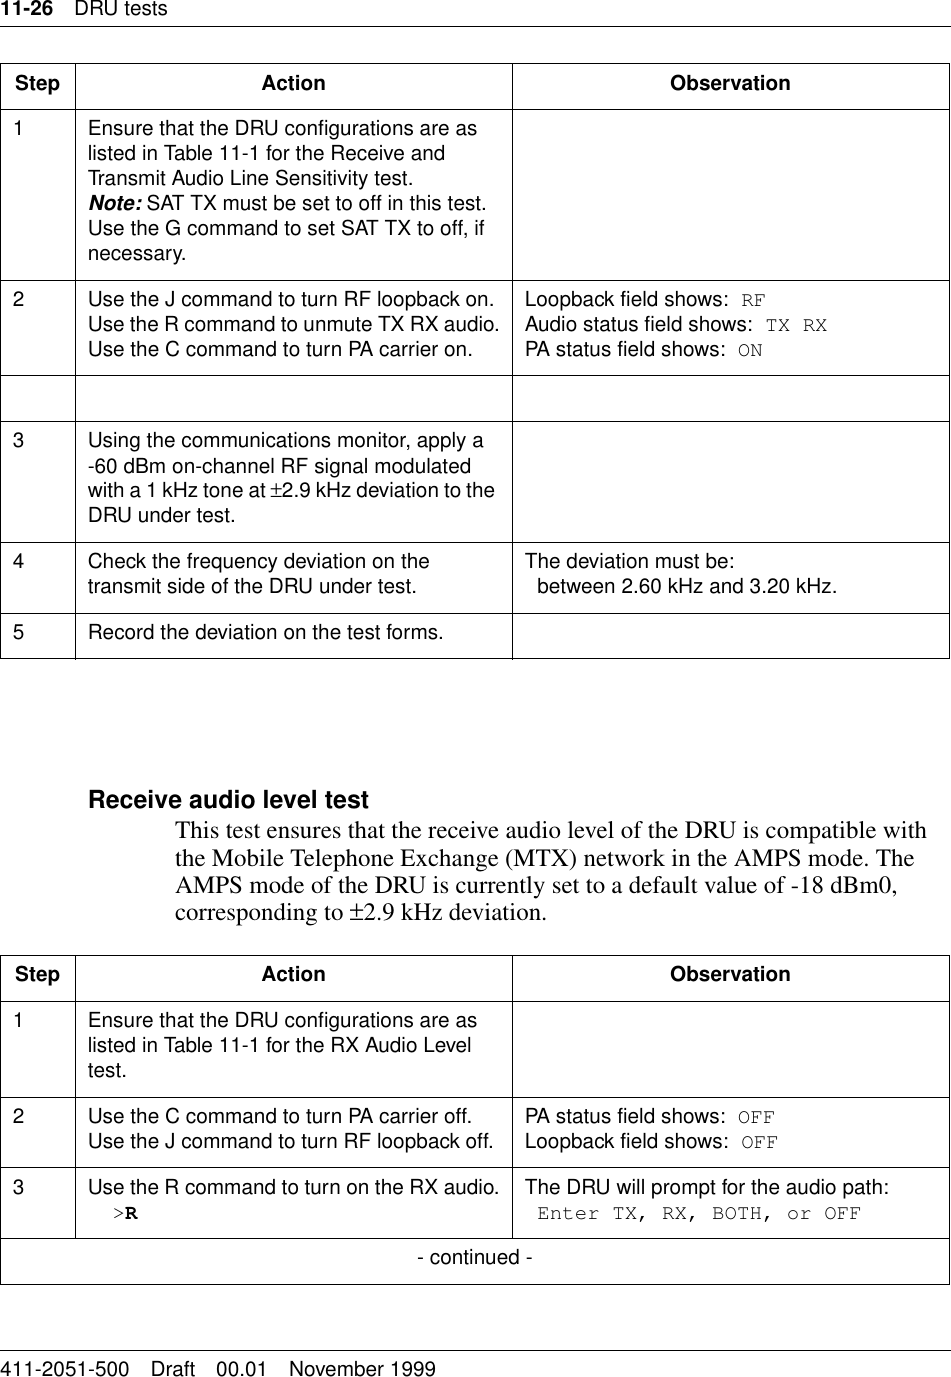 11-26 DRU tests411-2051-500 Draft 00.01 November 1999Receive audio level testThis test ensures that the receive audio level of the DRU is compatible with the Mobile Telephone Exchange (MTX) network in the AMPS mode. The AMPS mode of the DRU is currently set to a default value of -18 dBm0, corresponding to ±2.9 kHz deviation.Step Action Observation1 Ensure that the DRU configurations are as listed in Table 11-1 for the Receive and Transmit Audio Line Sensitivity test.Note: SAT TX must be set to off in this test. Use the G command to set SAT TX to off, if necessary.2 Use the J command to turn RF loopback on.Use the R command to unmute TX RX audio.Use the C command to turn PA carrier on.Loopback field shows: RFAudio status field shows: TX RXPA status field shows: ON3 Using the communications monitor, apply a -60 dBm on-channel RF signal modulated with a 1 kHz tone at ±2.9 kHz deviation to the DRU under test.4 Check the frequency deviation on the transmit side of the DRU under test. The deviation must be:between 2.60 kHz and 3.20 kHz.5 Record the deviation on the test forms.Step Action Observation1 Ensure that the DRU configurations are as listed in Table 11-1 for the RX Audio Level test.2 Use the C command to turn PA carrier off.Use the J command to turn RF loopback off. PA status field shows: OFFLoopback field shows: OFF3 Use the R command to turn on the RX audio.&gt;RThe DRU will prompt for the audio path:Enter TX, RX, BOTH, or OFF- continued -